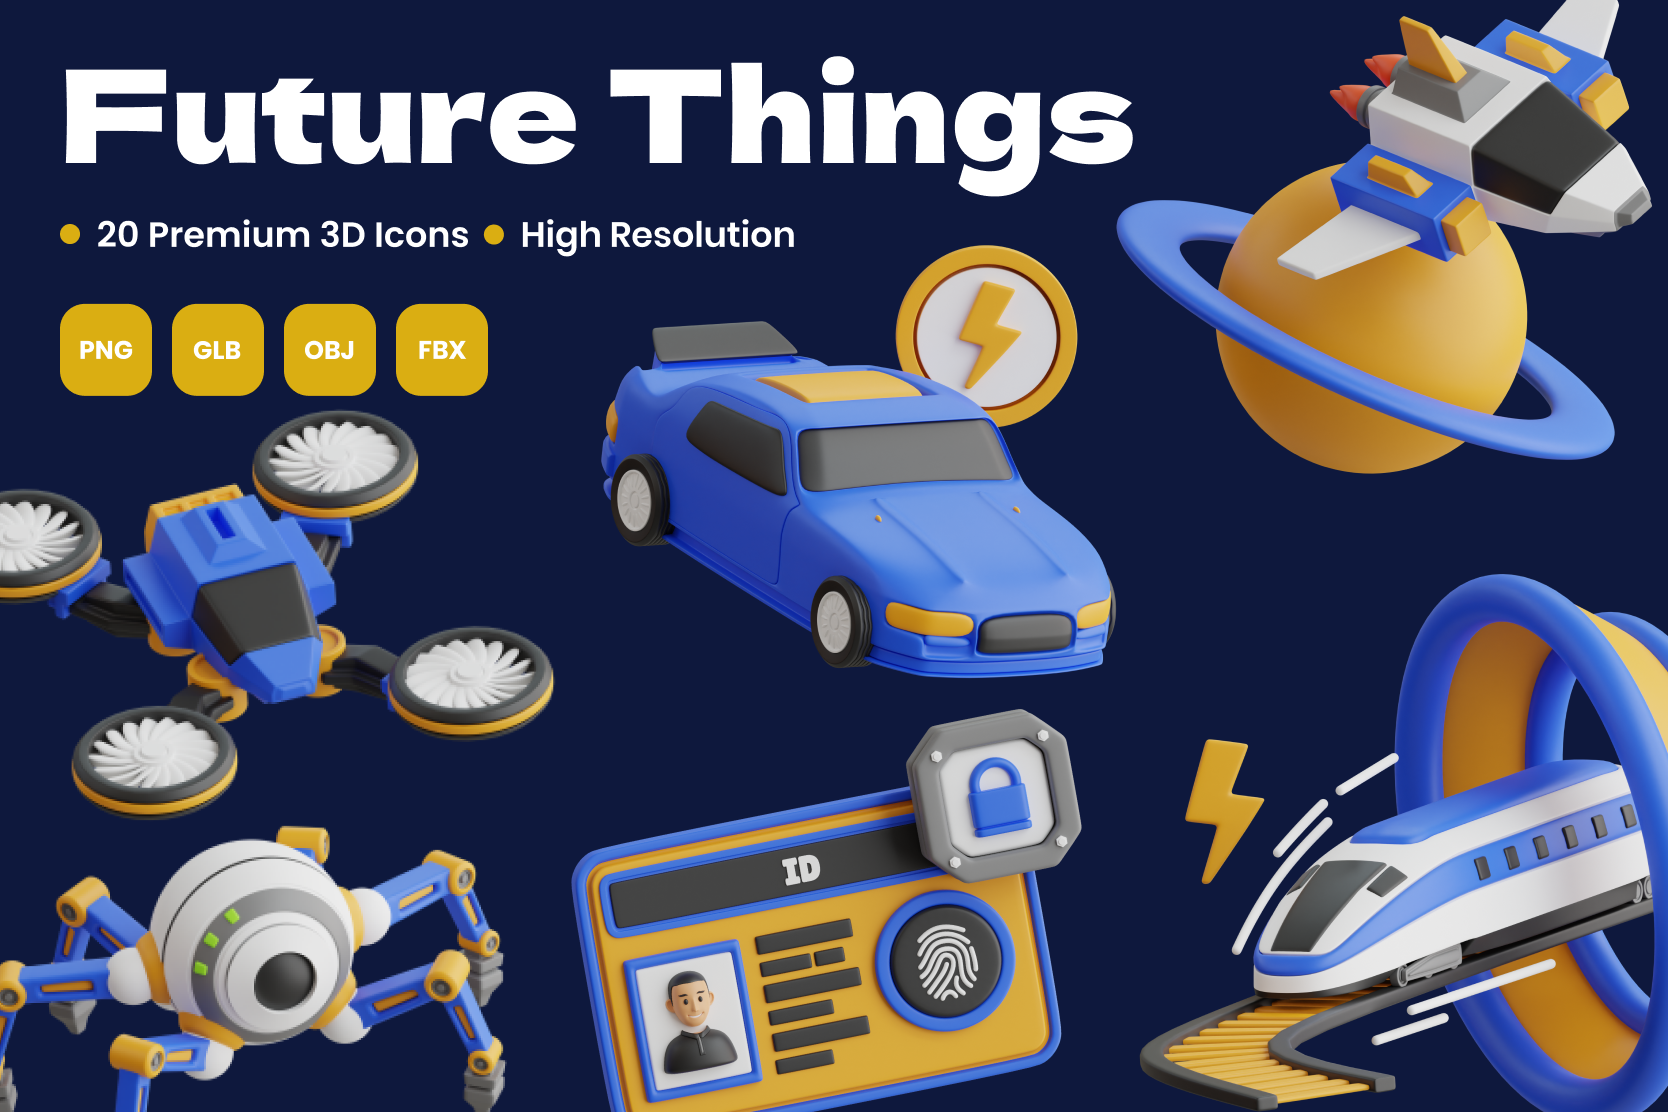 Premium Future Things 3D Illustration pack from Science & Technology 3D Illustrations